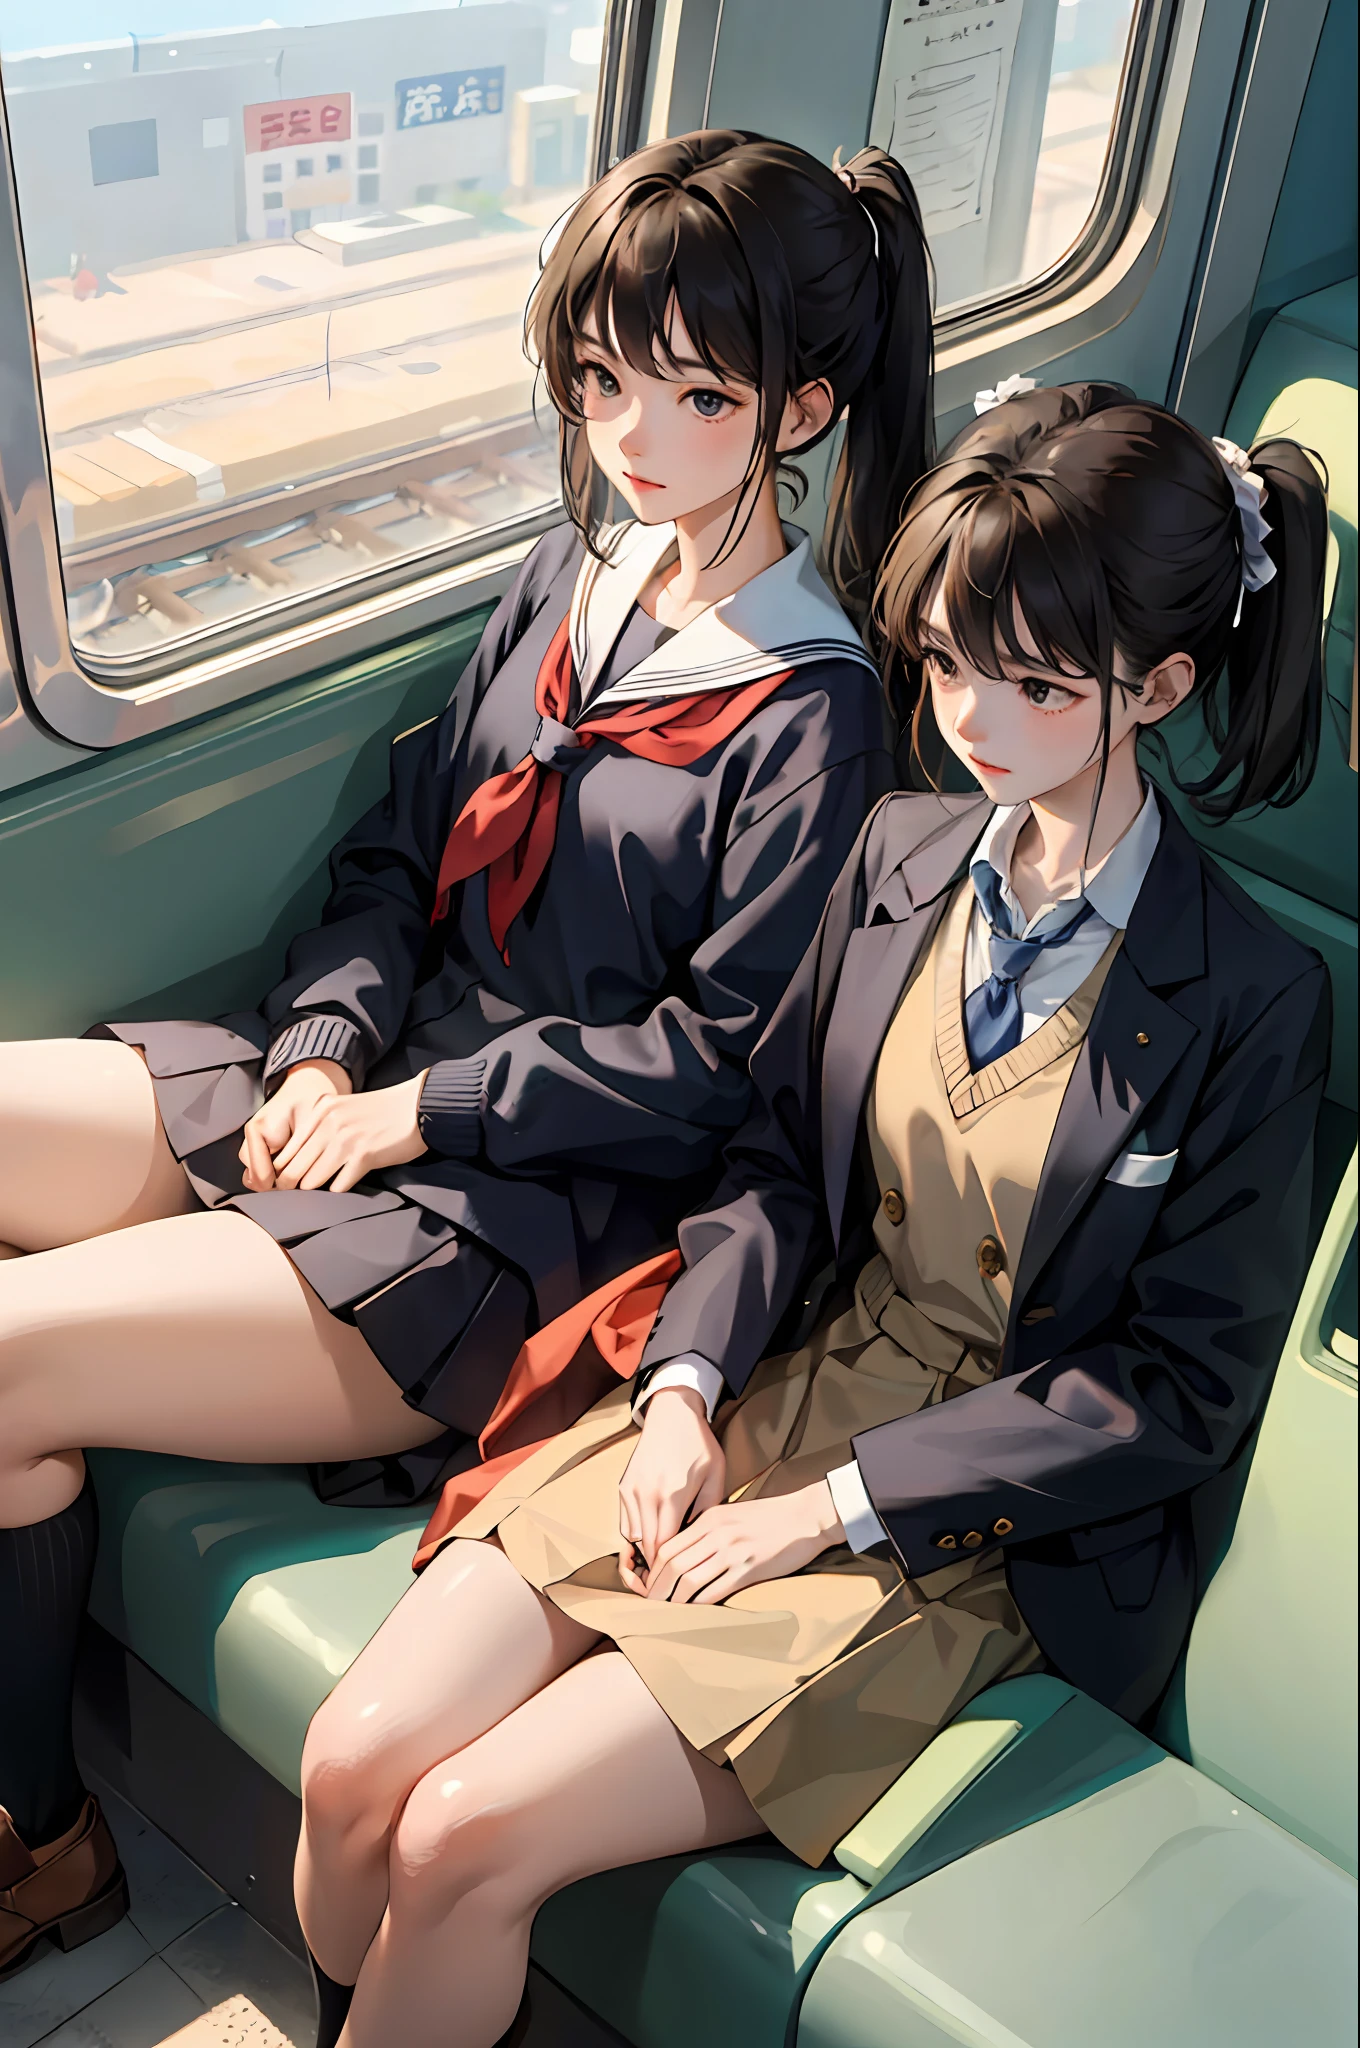 (​masterpiece:1.2、top-quality)、(Authentic images、intricate-detail)、solo、Female 1 Person、schools、student clothes、Sitting in a seat on a train、Commuting to school